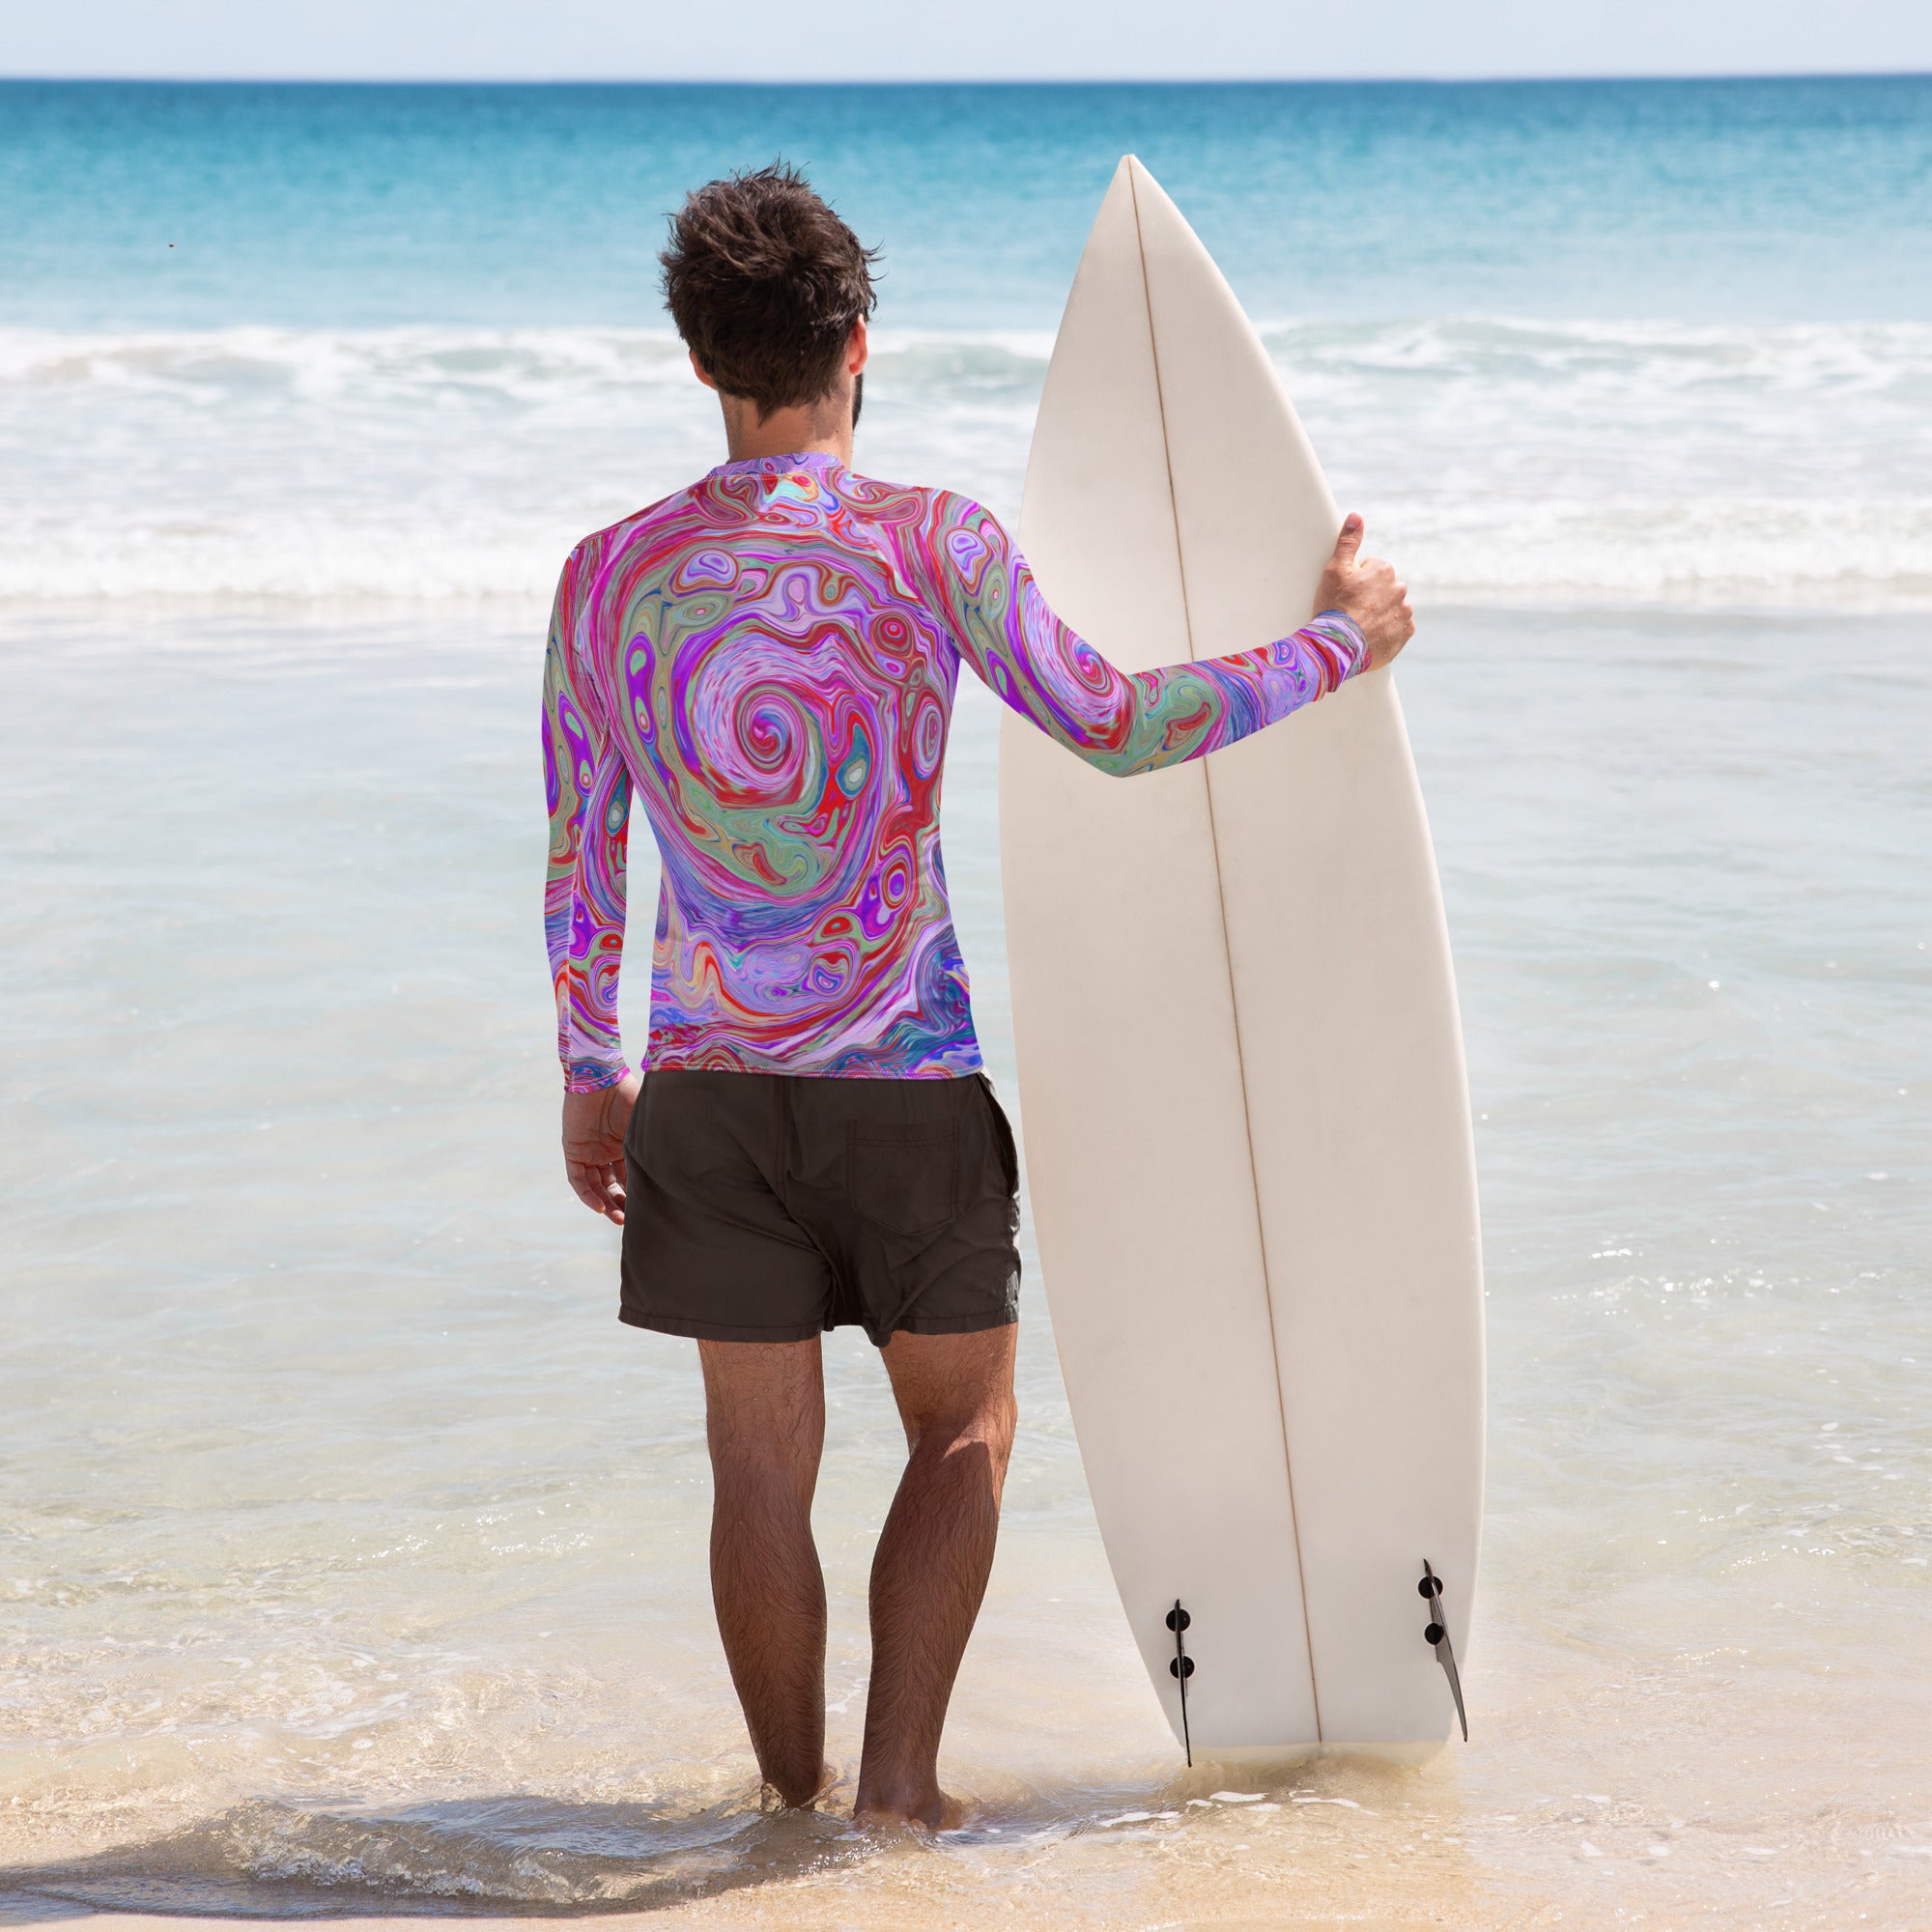 Men's Athletic Rash Guard Shirts, Groovy Abstract Retro Red, Purple and Pink Swirl